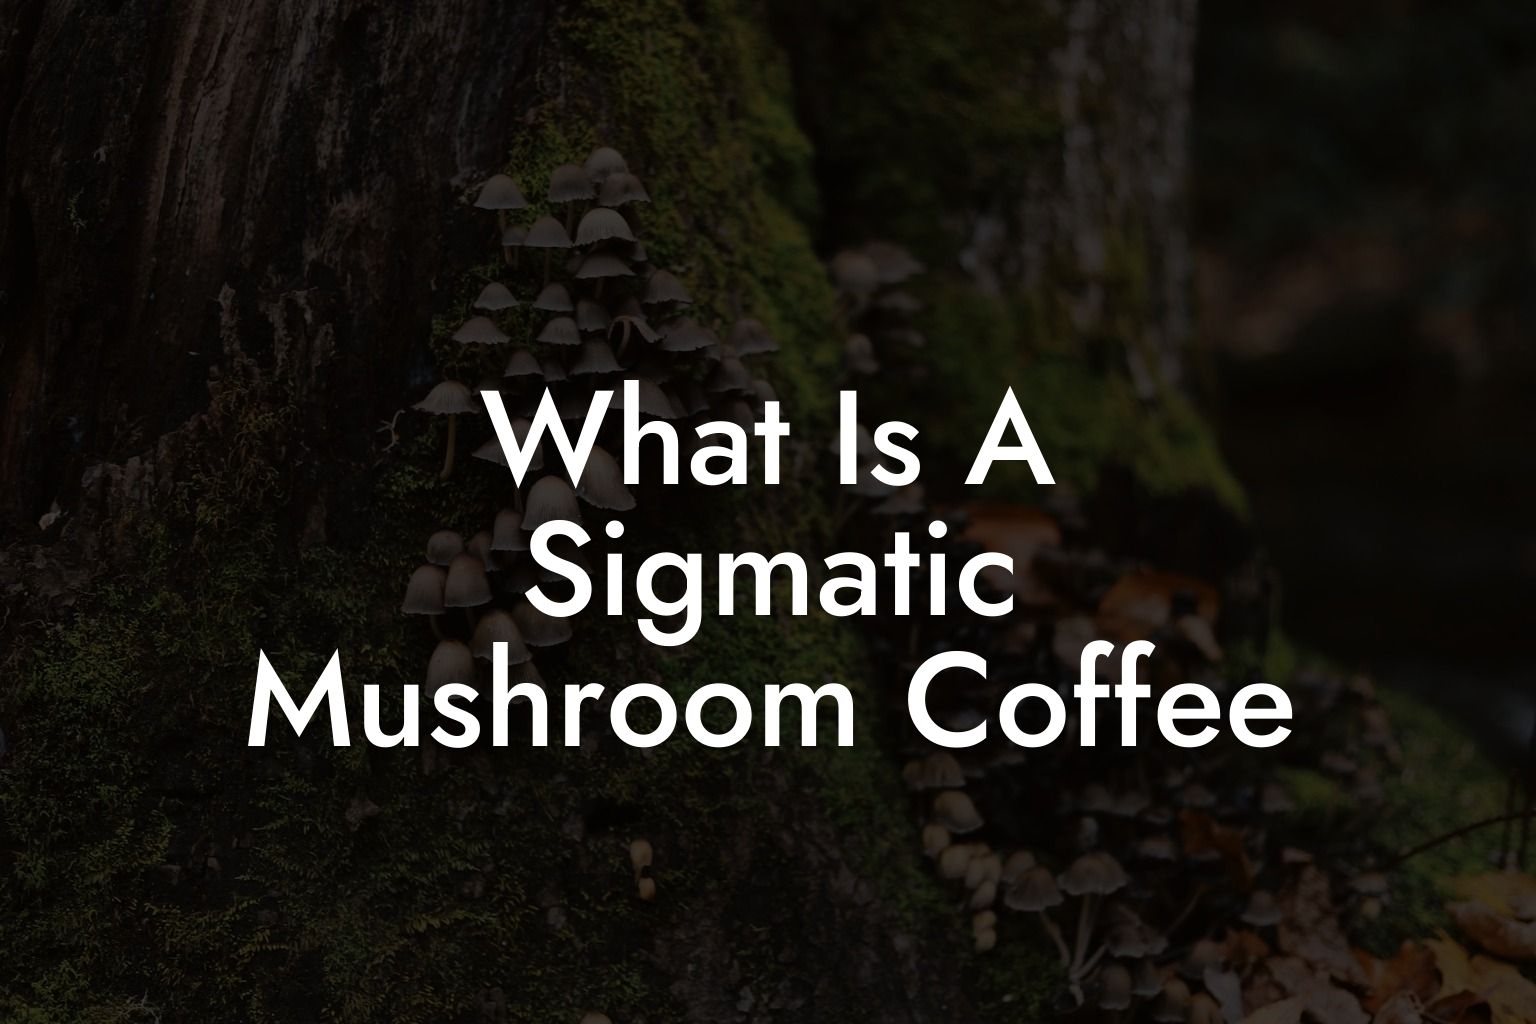 What Is A Sigmatic Mushroom Coffee